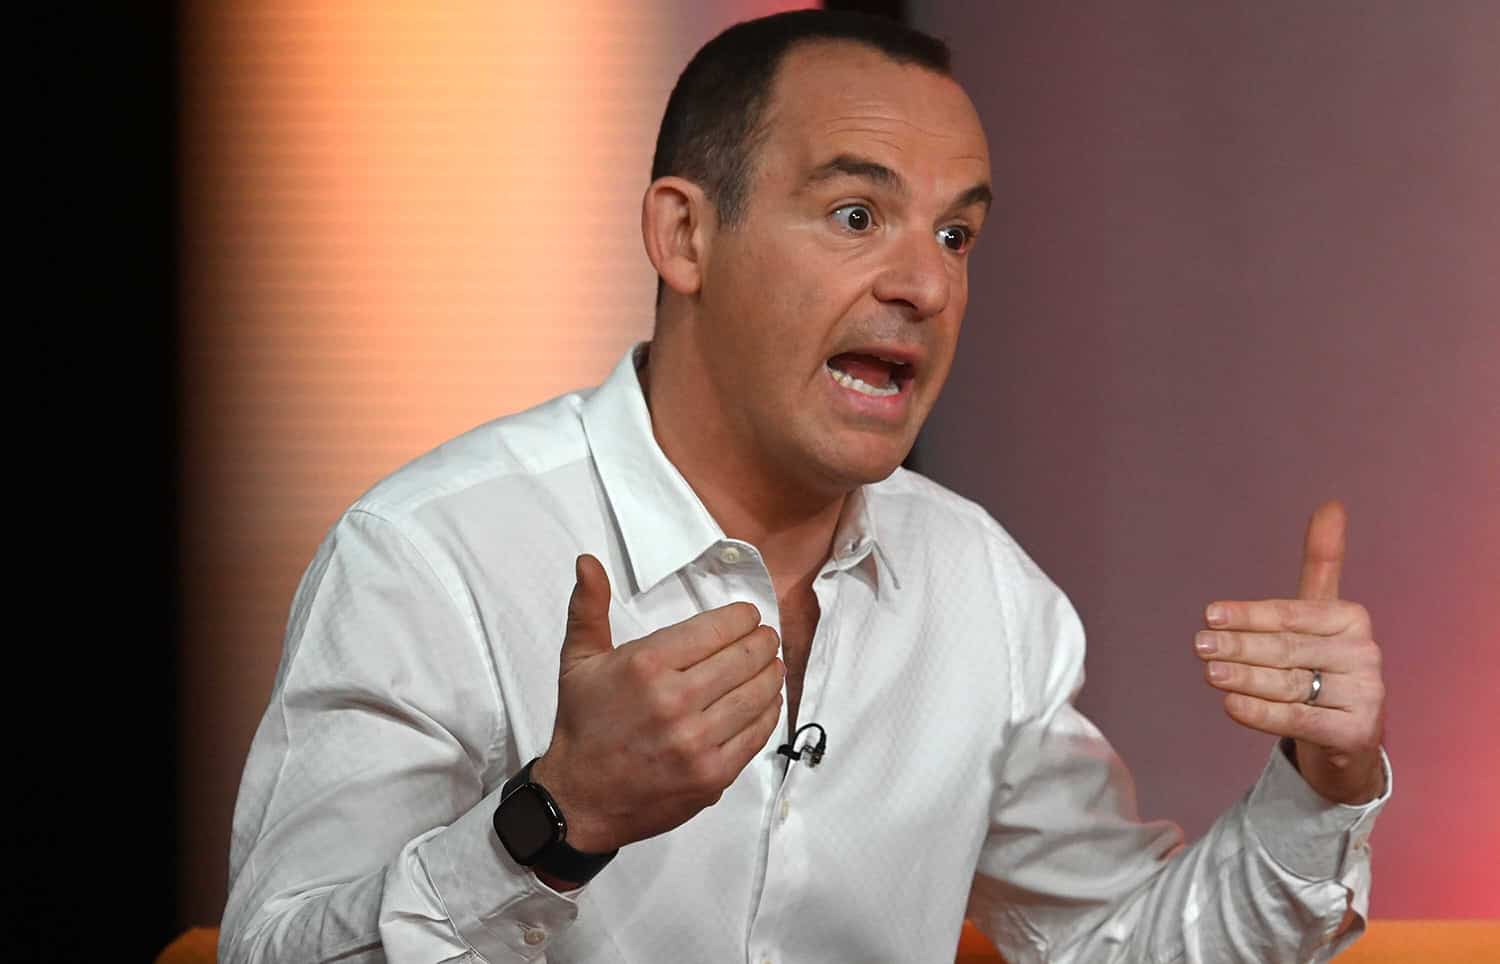 Now right-wing media attack Martin Lewis but people are not standing for it